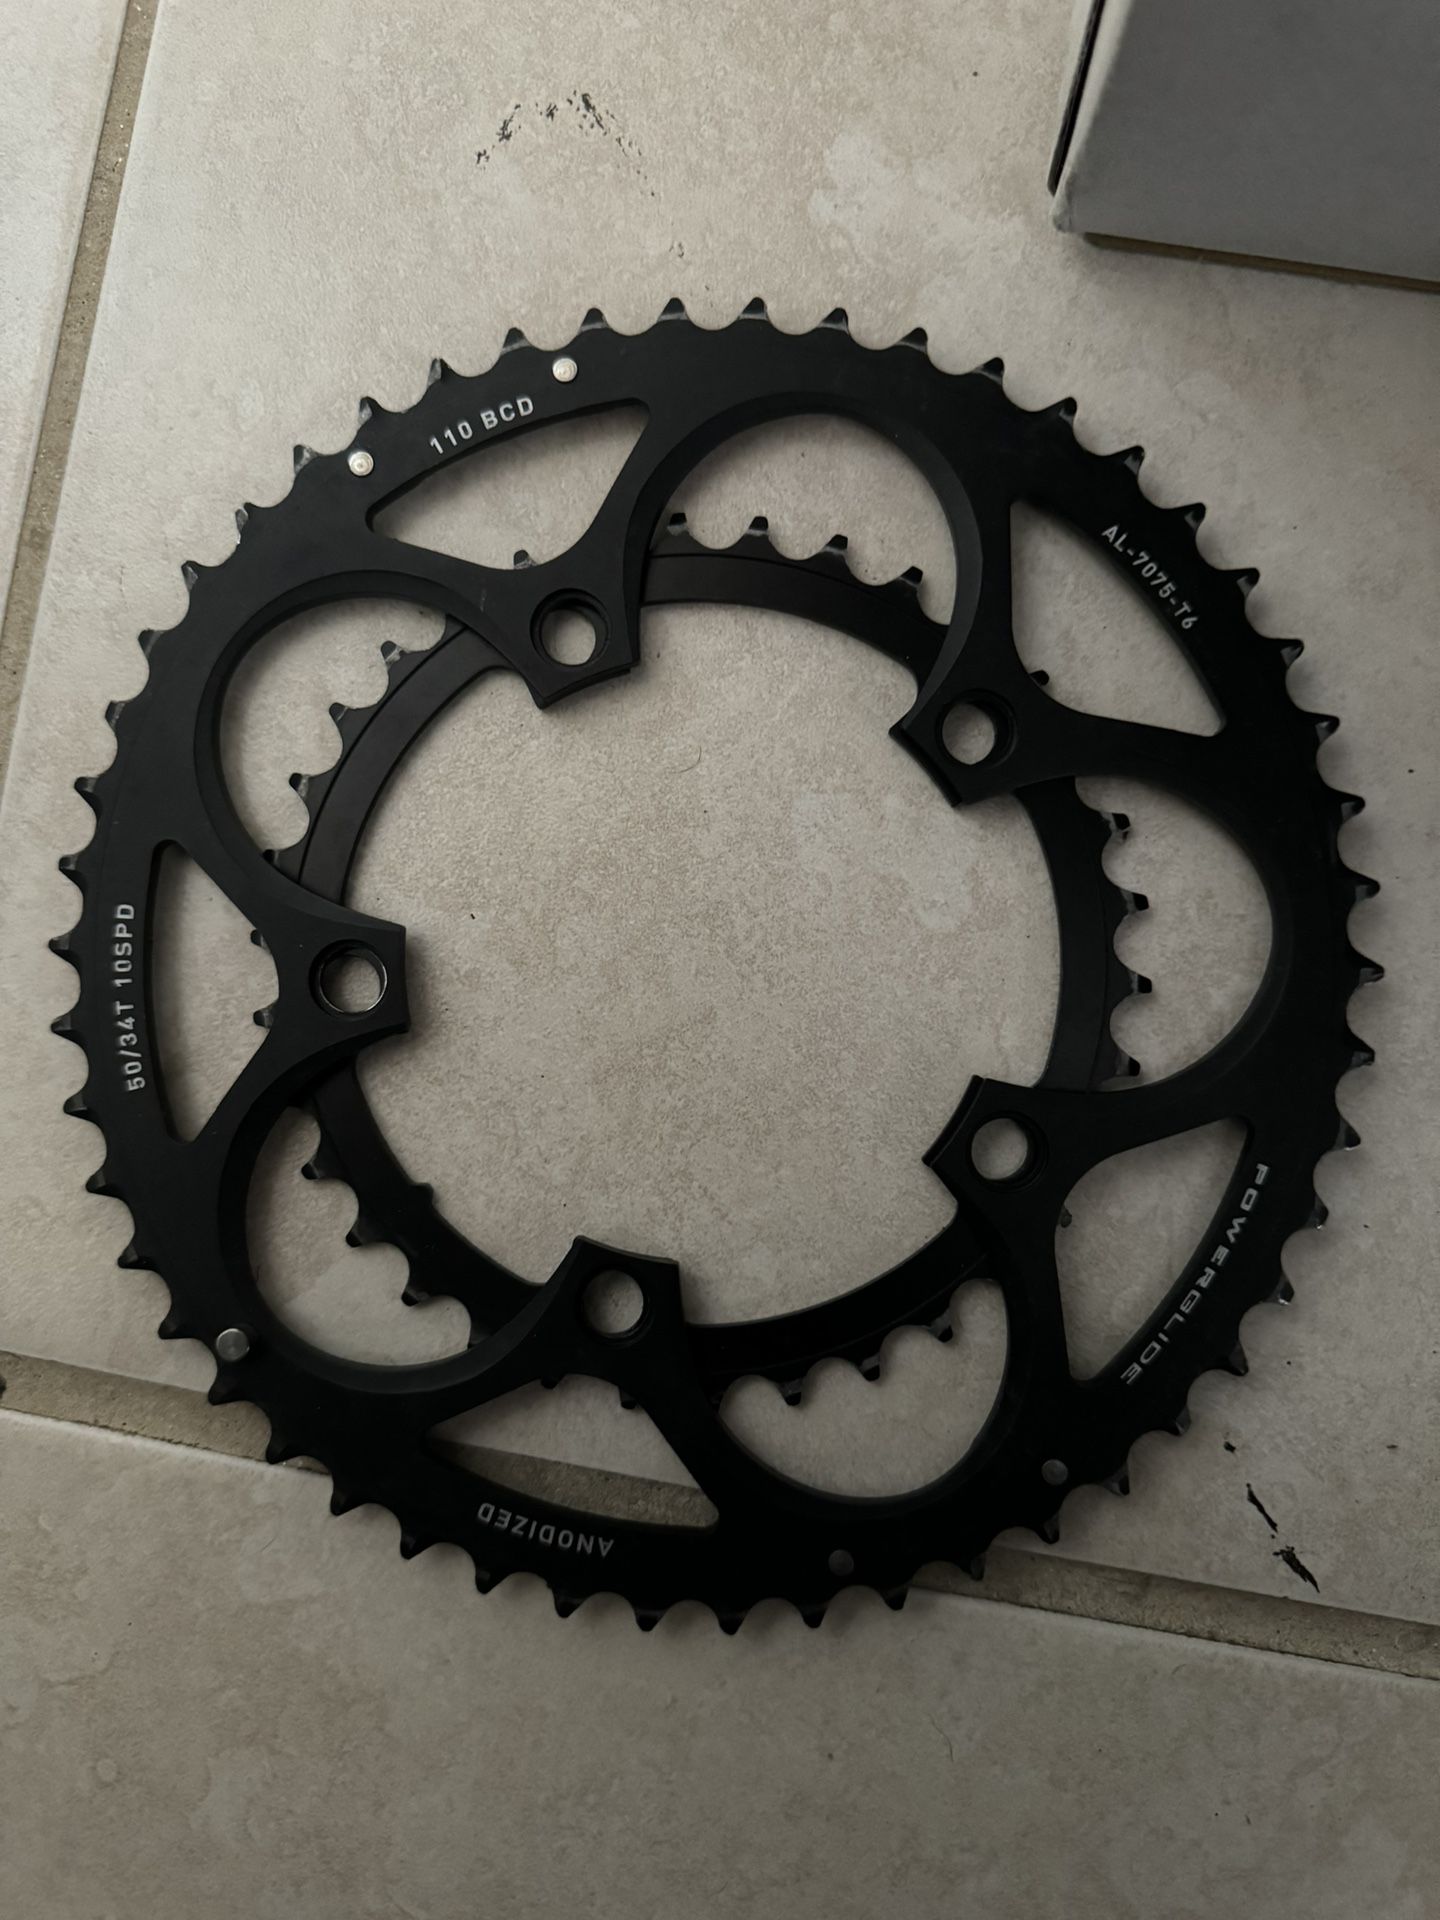 2x Road Chainrings 110BCD 5 Bolt